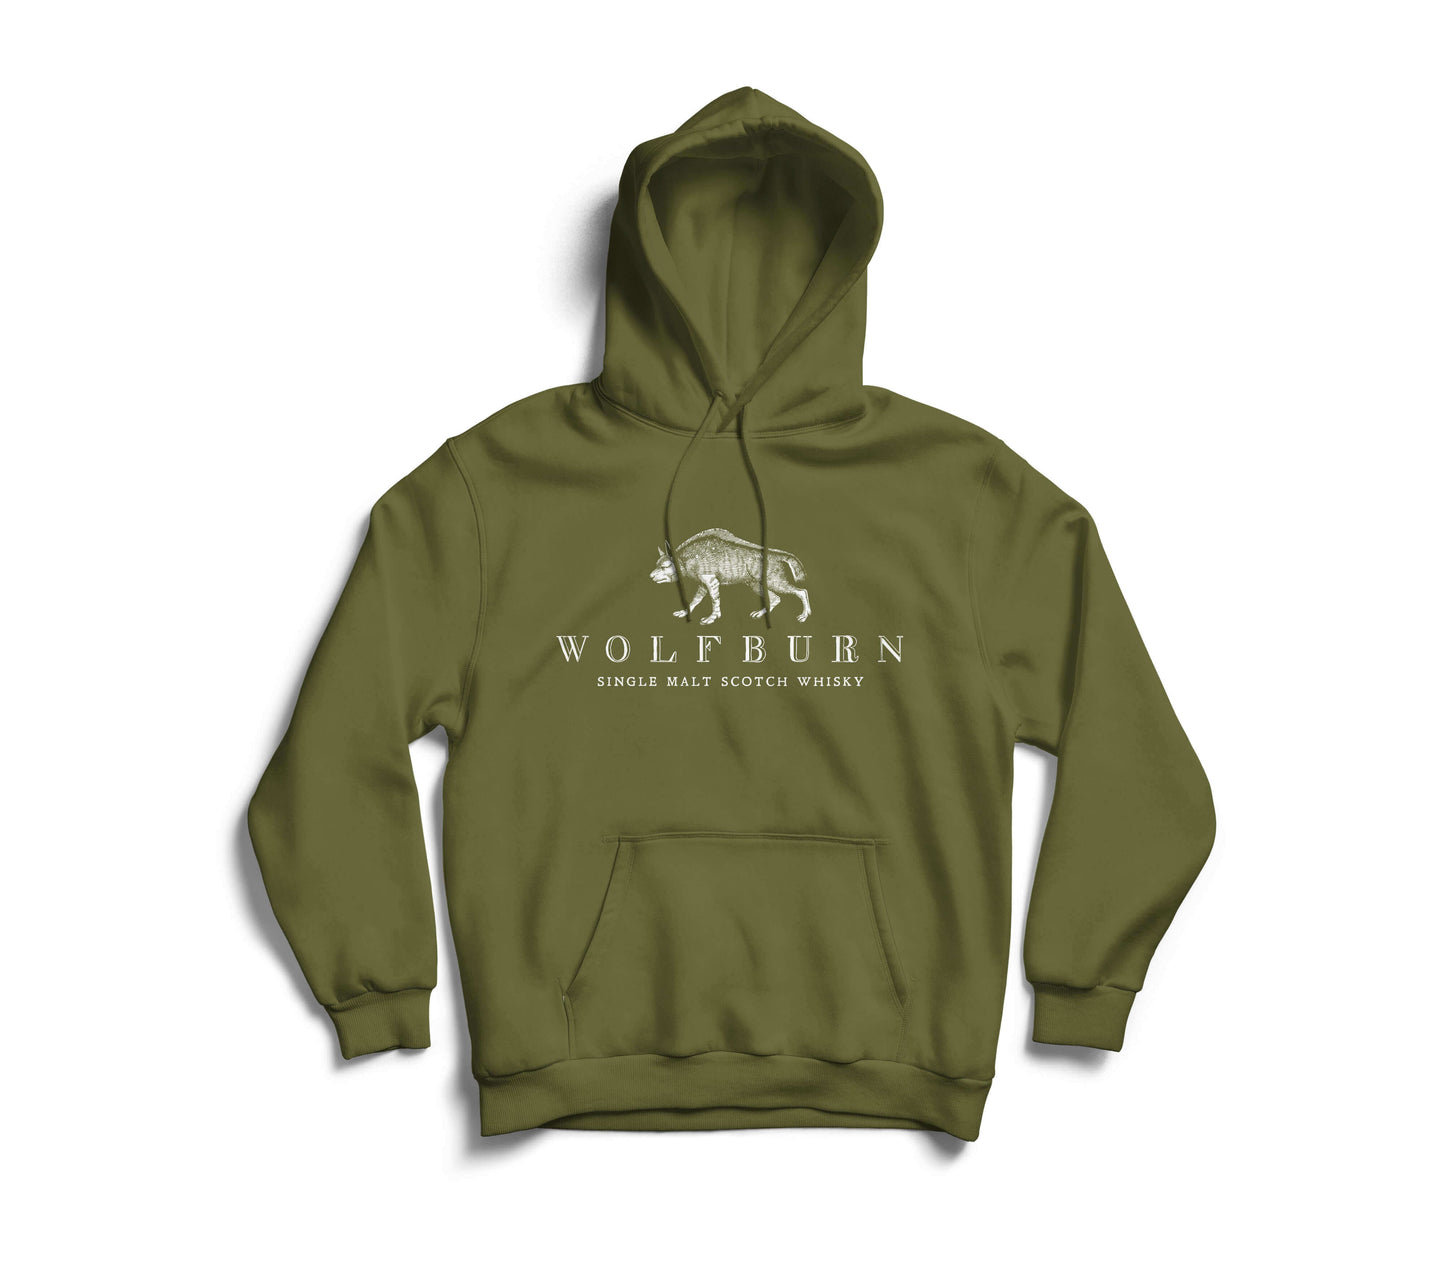 Wolfburn Distillery Wolfburn Hoodie ‘The Brave’ Hooded top. Screen printed 'Wolfburn' logo on the chest and large 'The Brave' on the back. £35.00